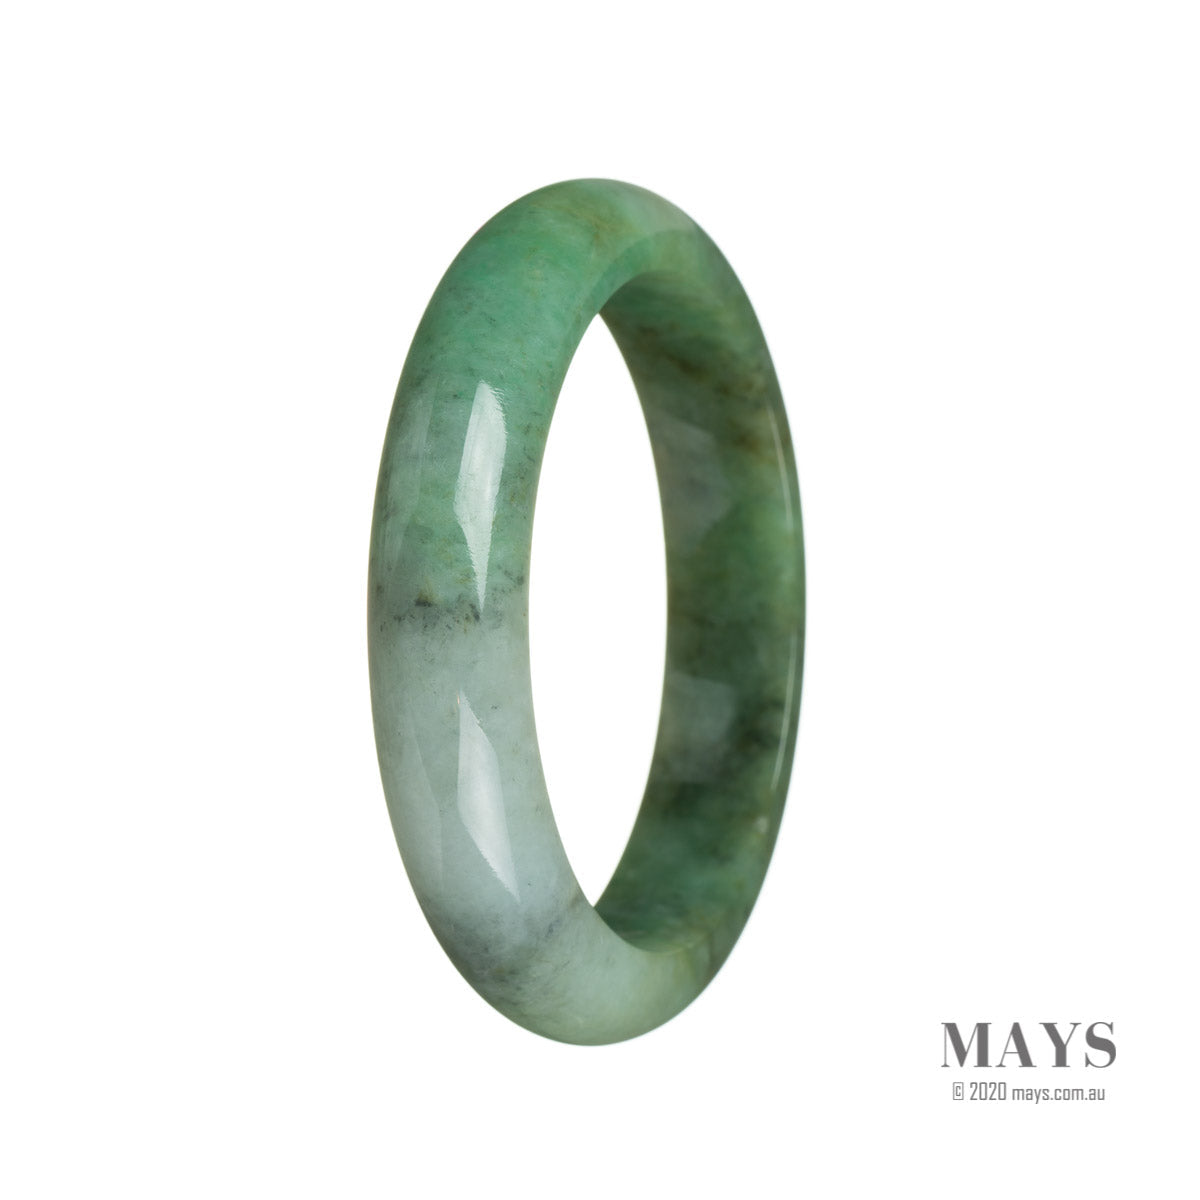 A close-up image of a traditional jade bangle bracelet in a vibrant green color with a unique pattern. The bracelet is shaped like a half moon and has a diameter of 60mm.